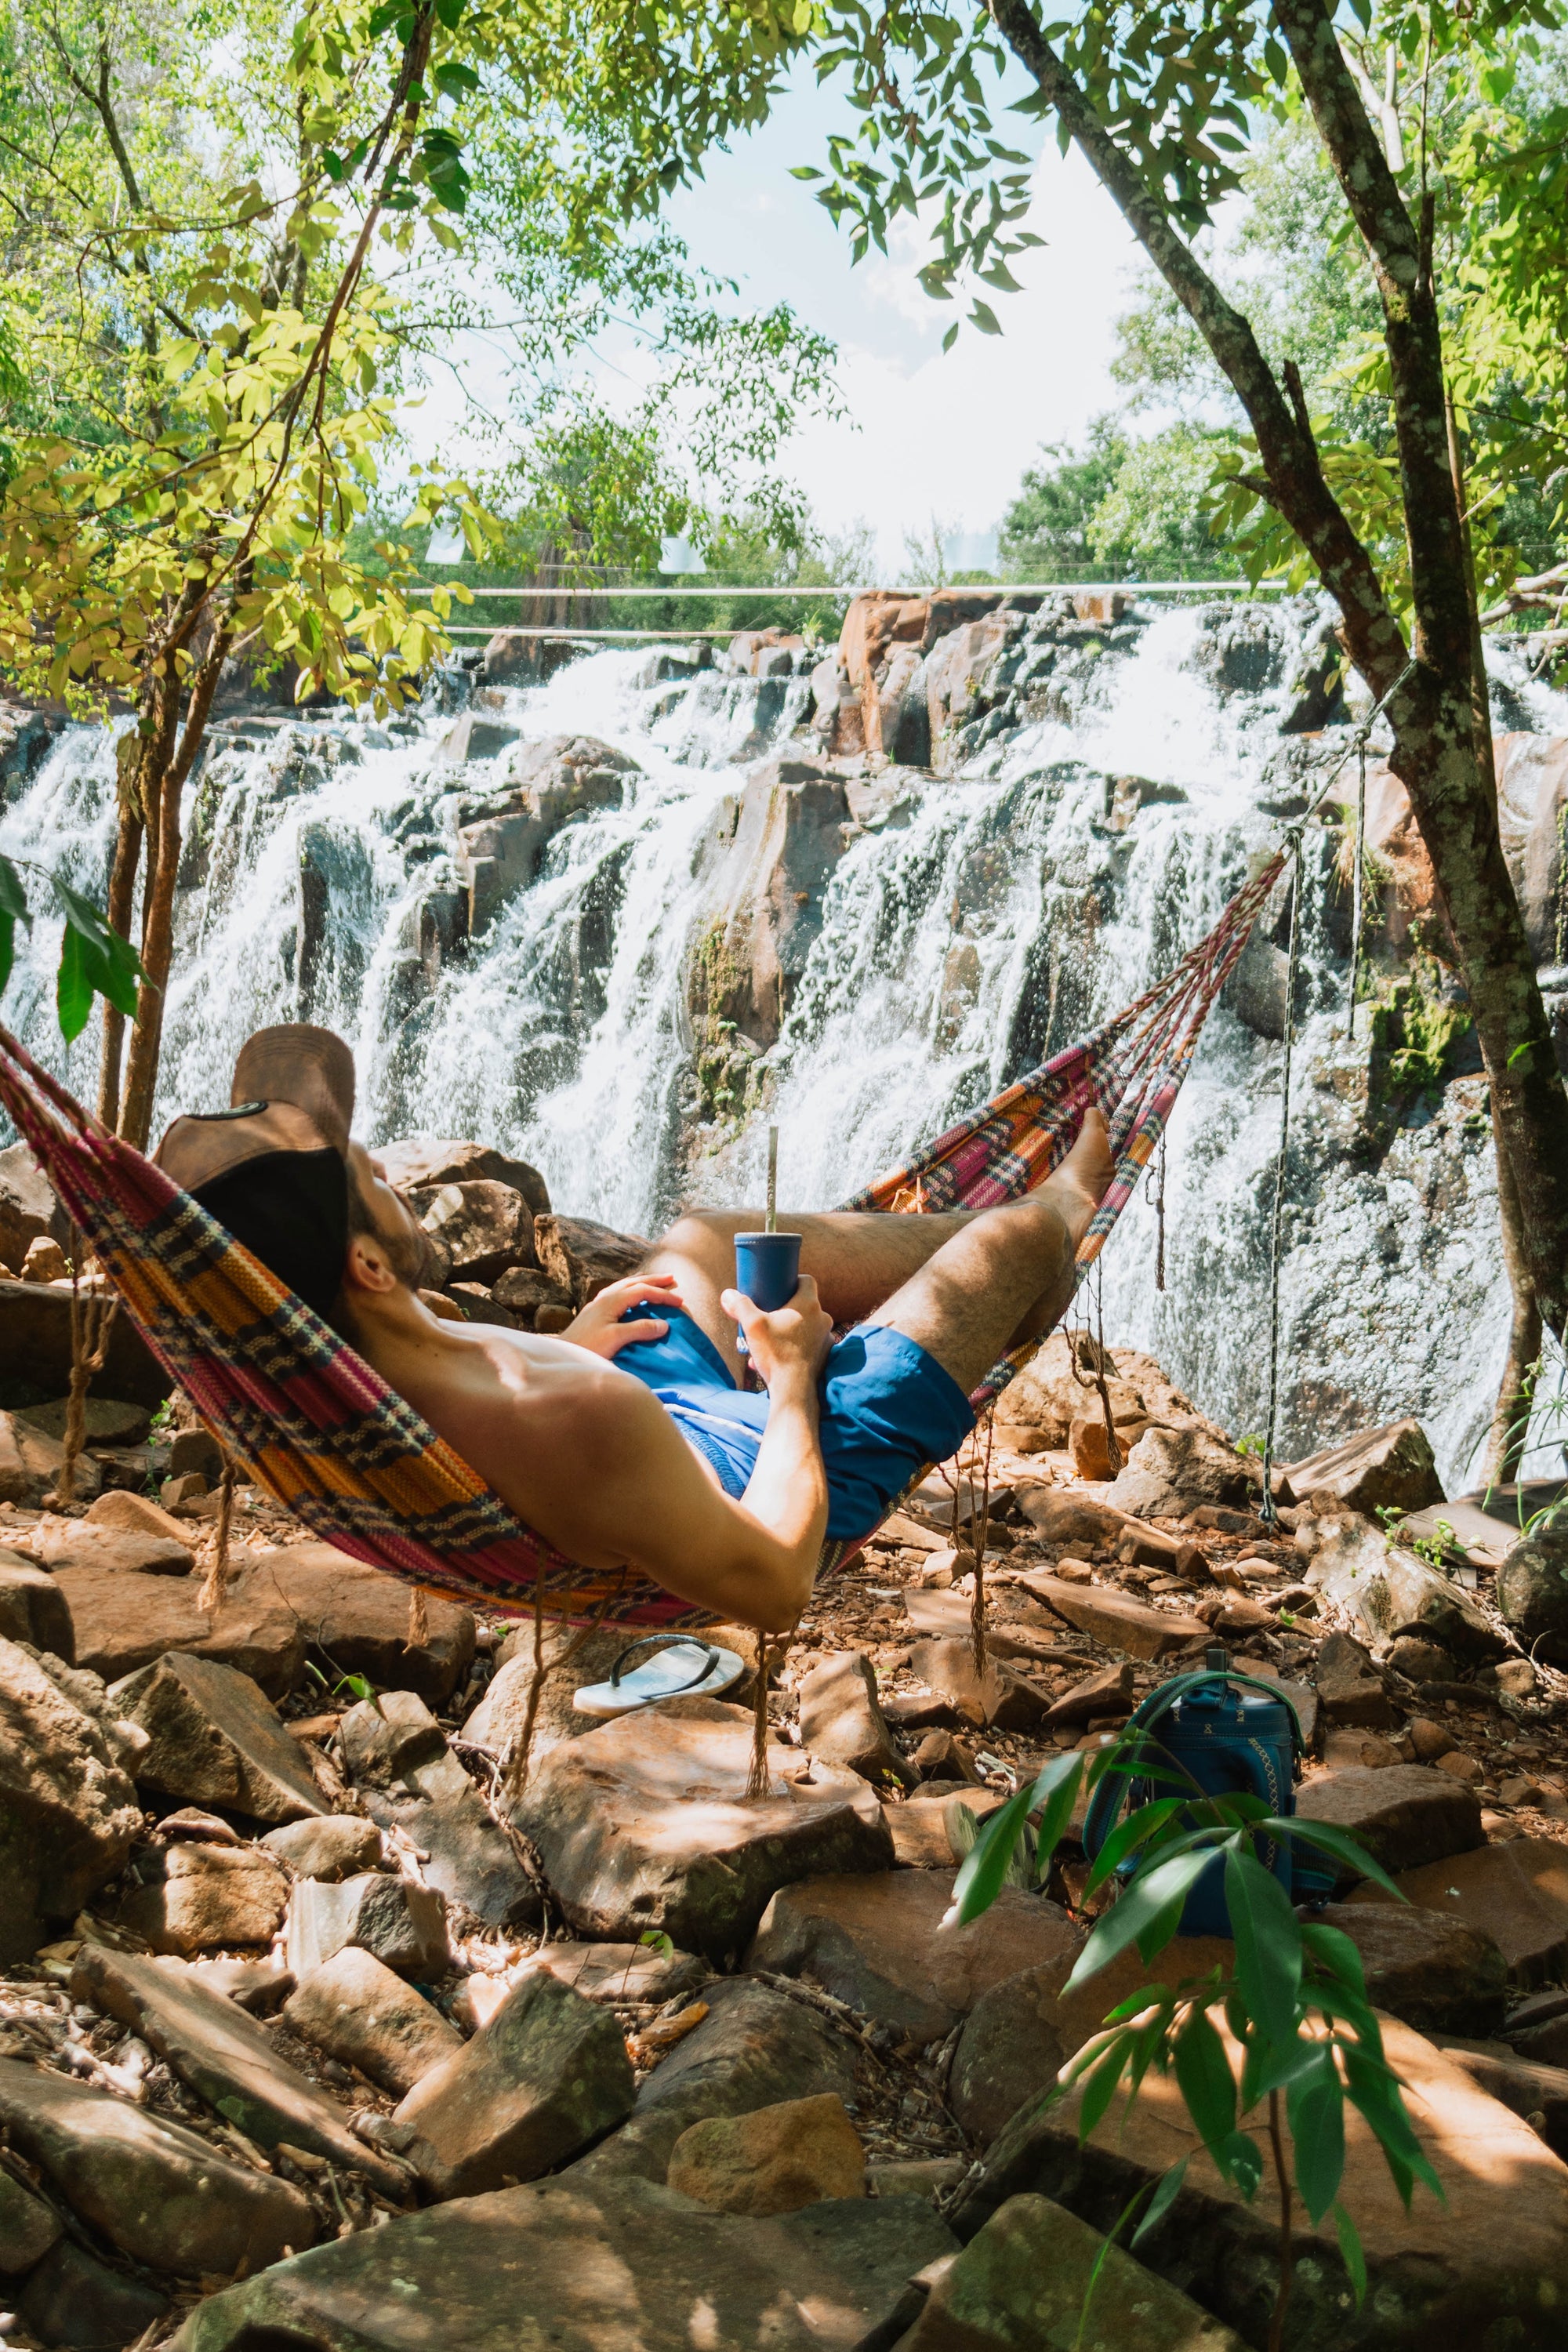 What Countries are Hammocks Most Popular In?